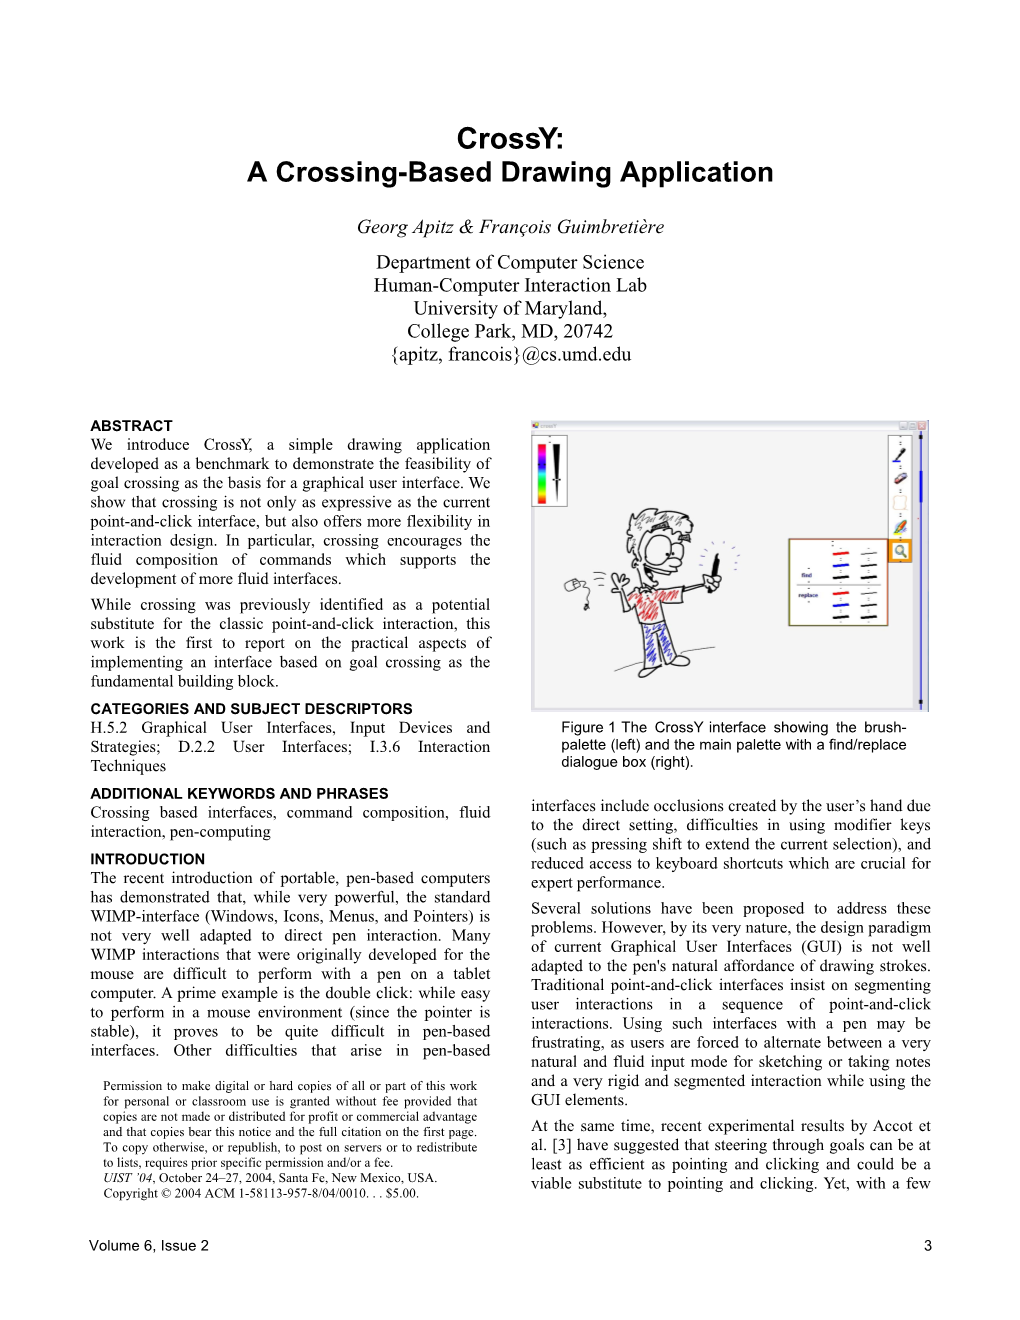 Crossy: a Crossing-Based Drawing Application